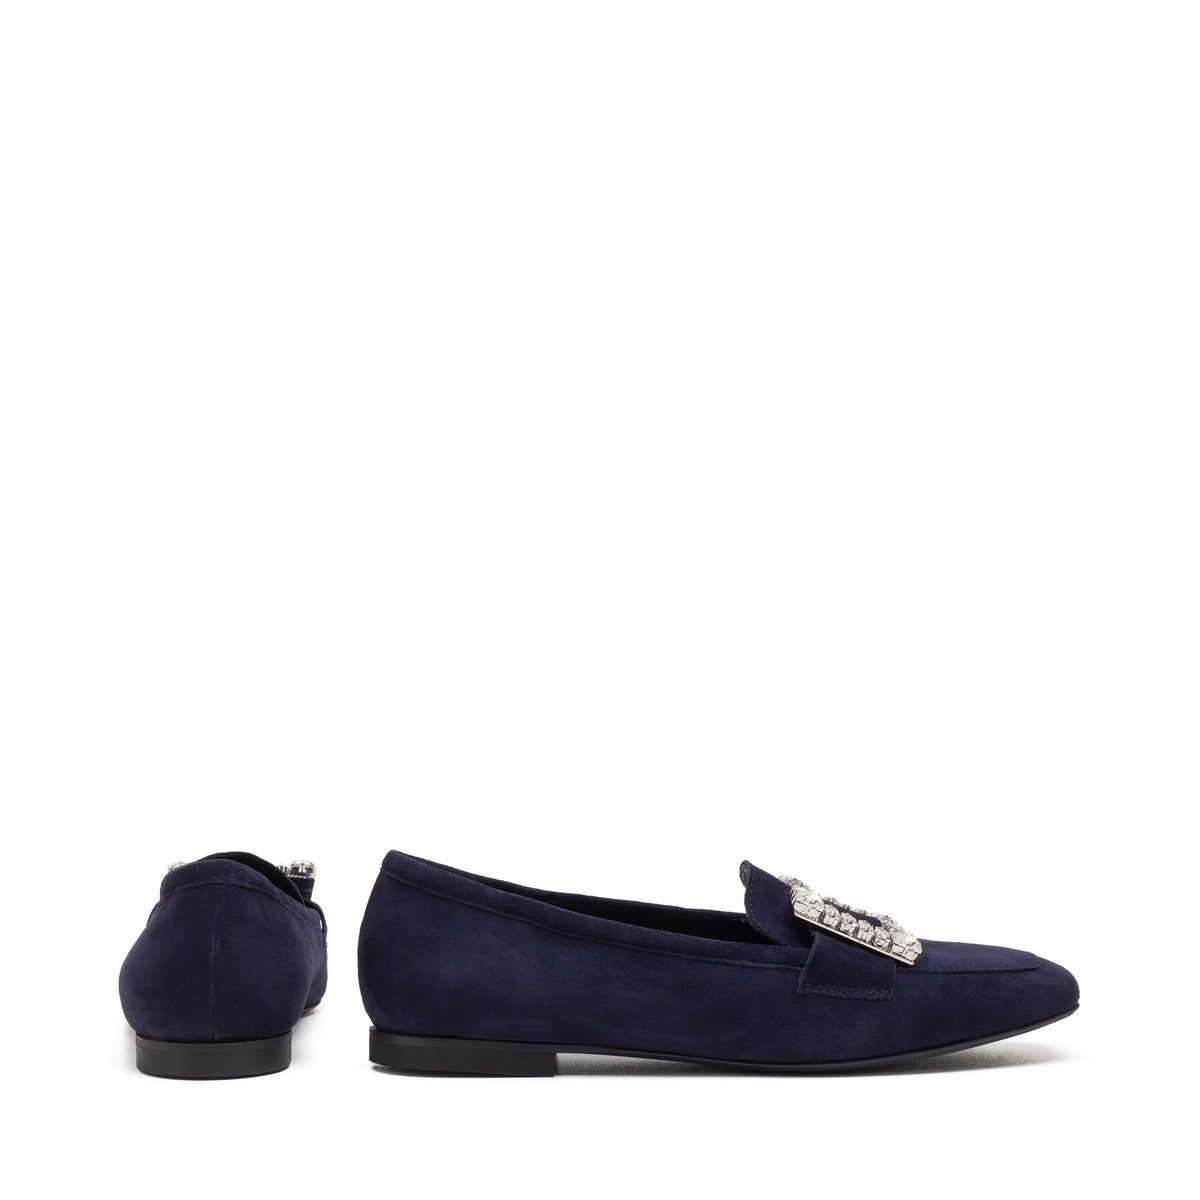 MARZIA WINTER LOAFERS